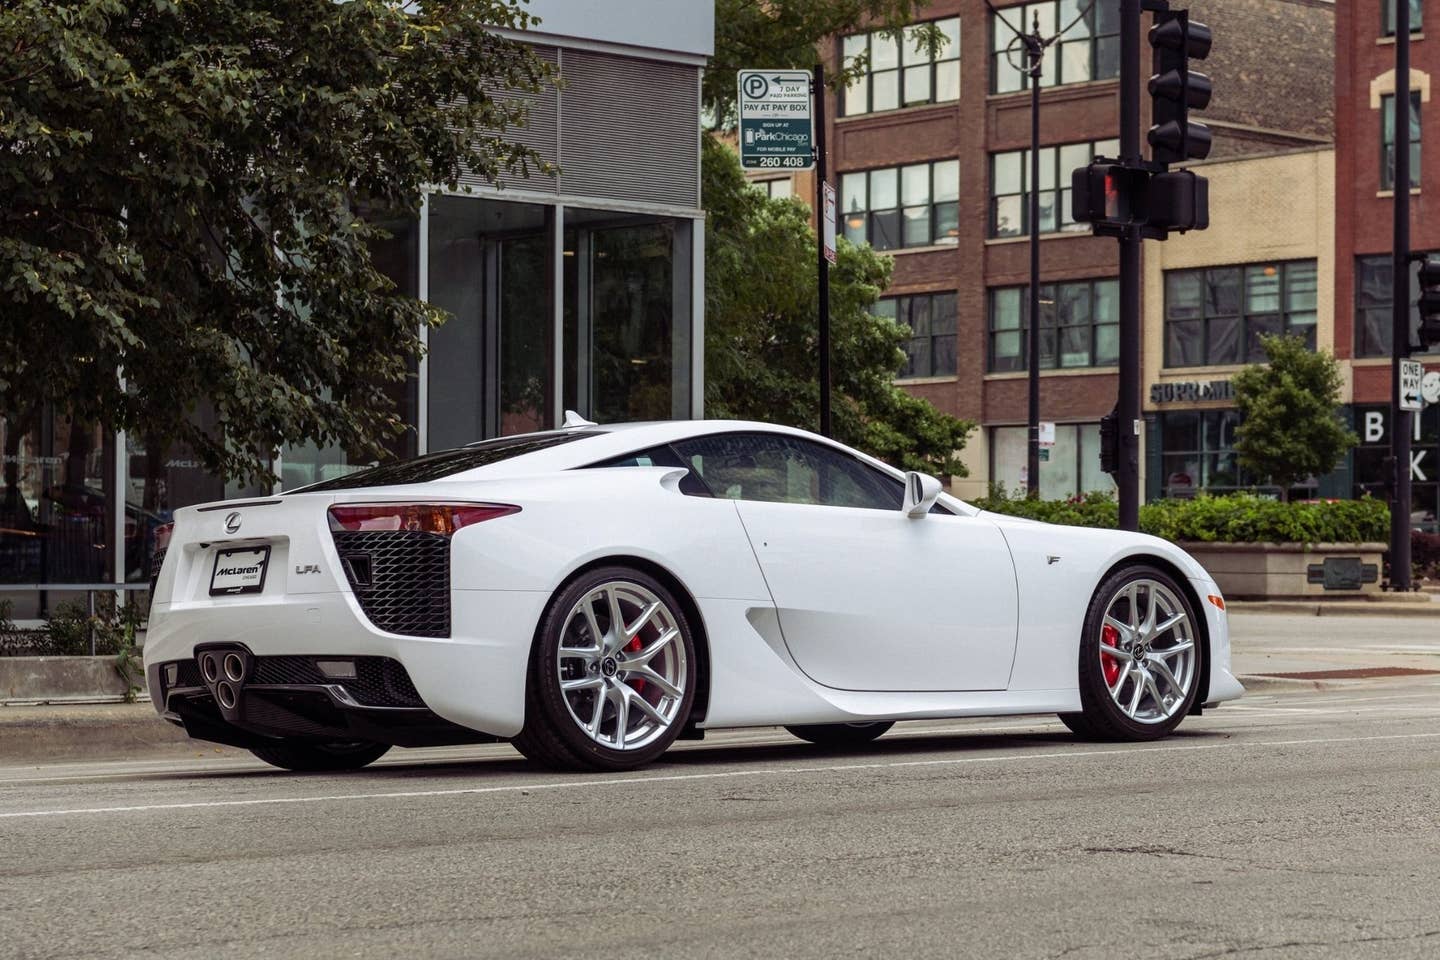 Rare 2012 Lexus LFA with 177 Miles Up for Auction | The Drive